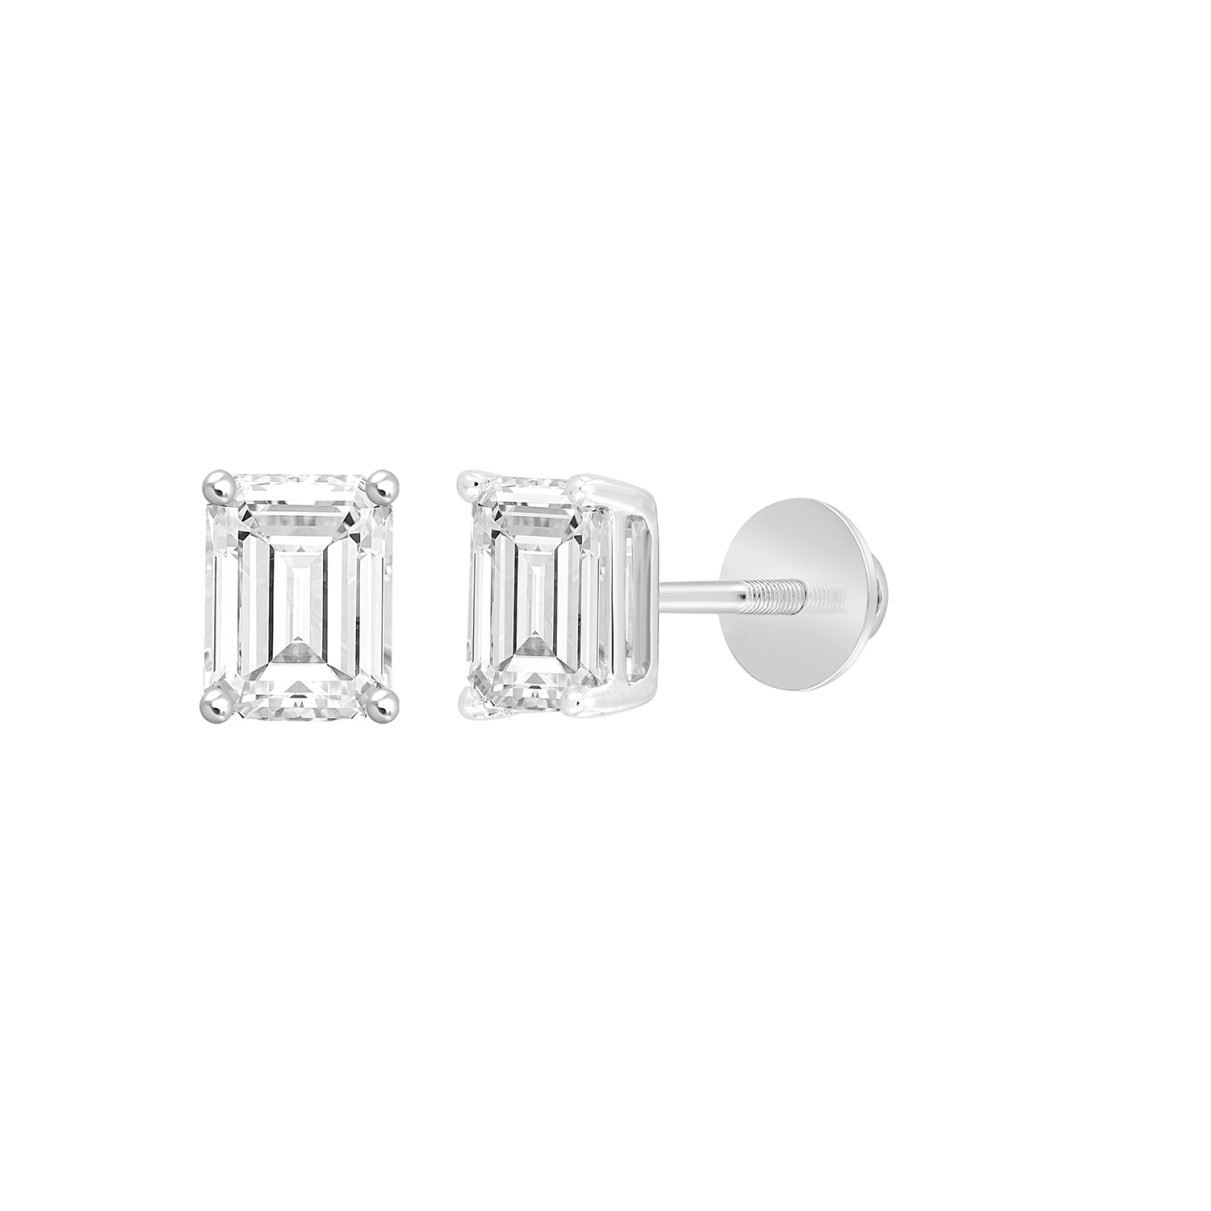 LADIES SOLITAIRE EARRINGS 3CT EMERALD DIAMOND 14K WHITE GOLD